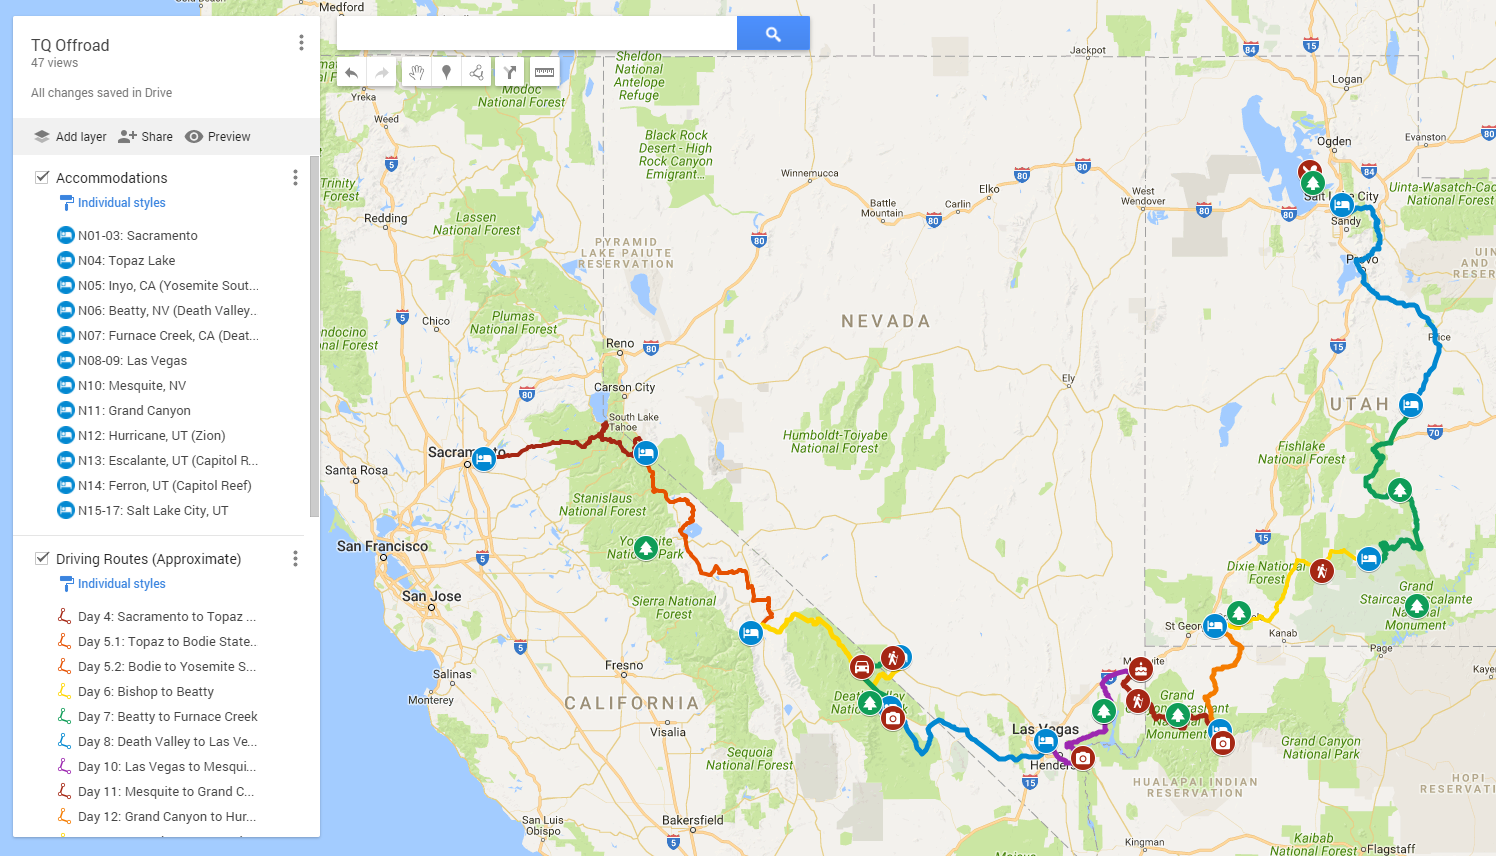 The &ldquo;My Maps&rdquo; map for the roadtrip